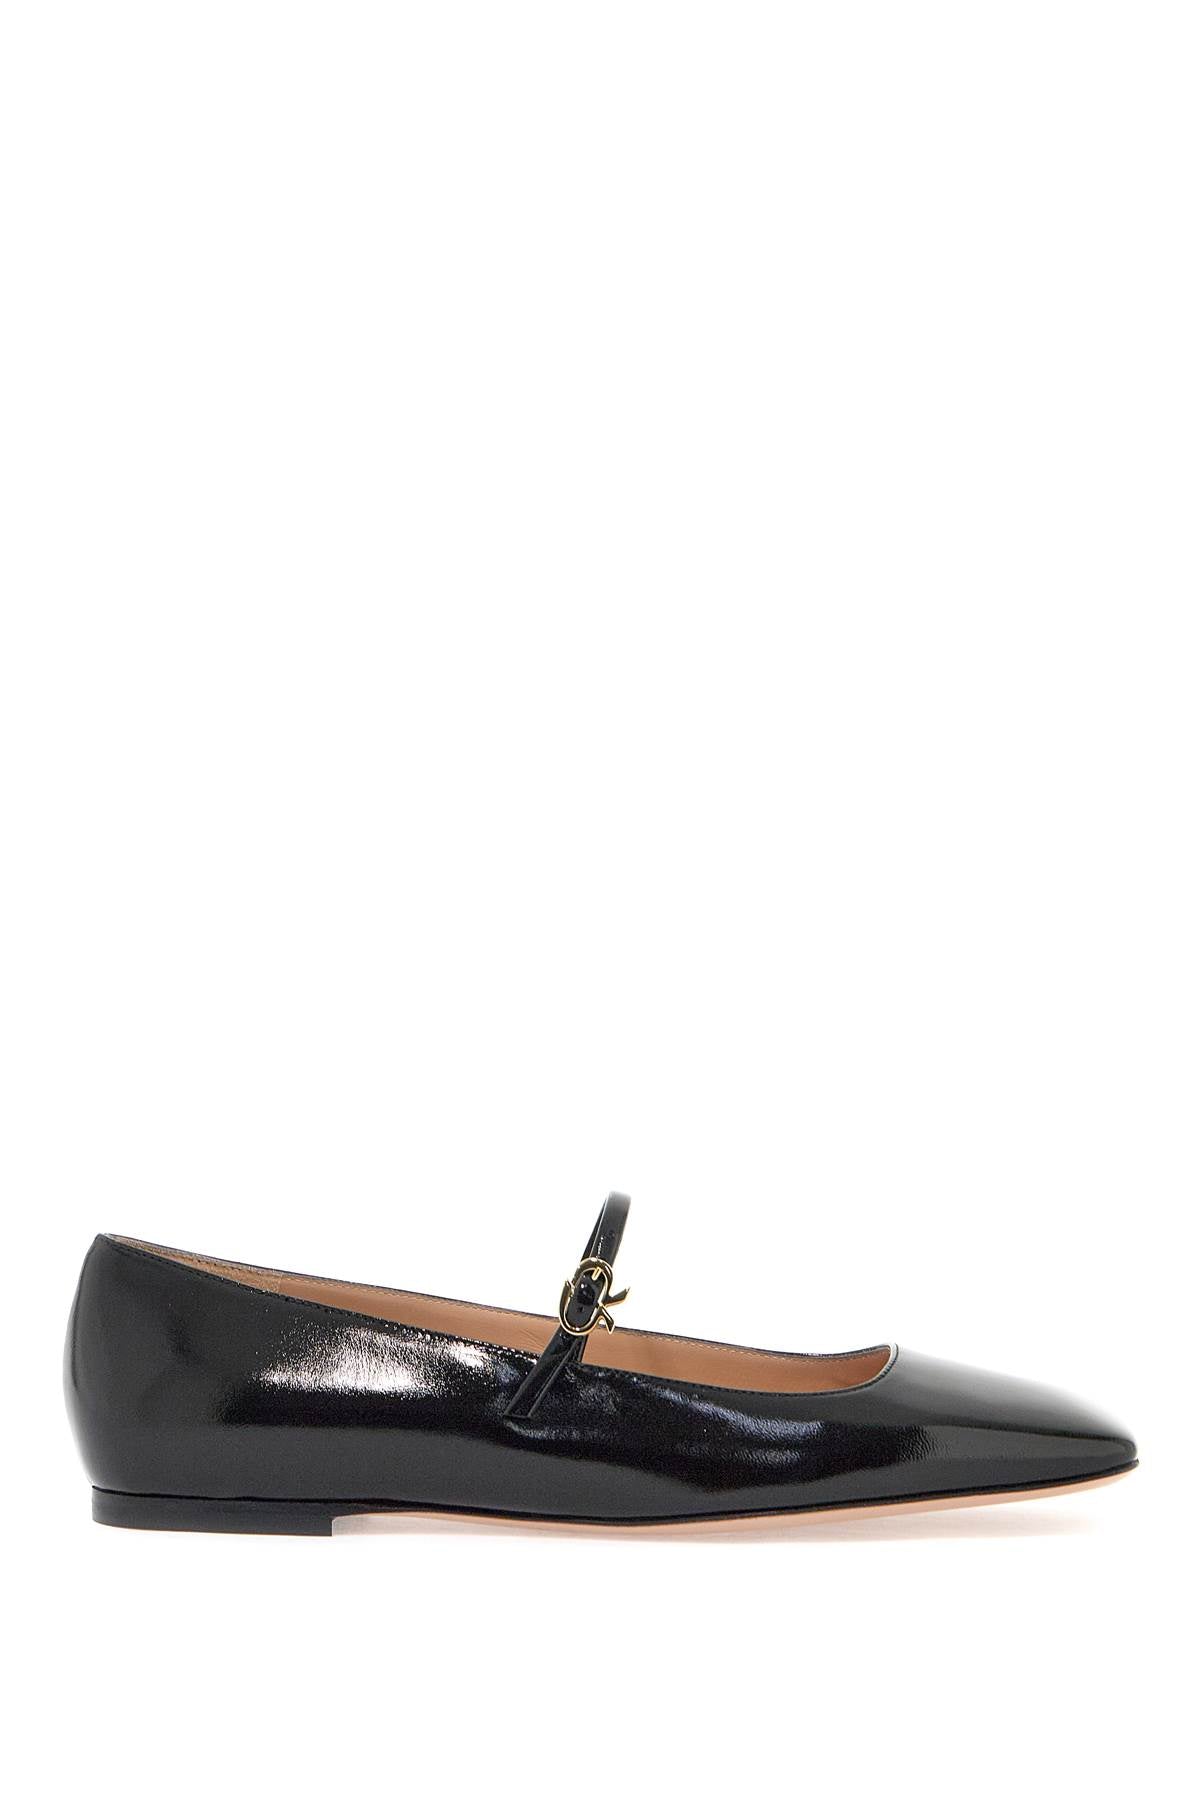 GIANVITO ROSSI Sophisticated Black Patent Ballerina Shoes with Iconic Ribbon Buckle for Women